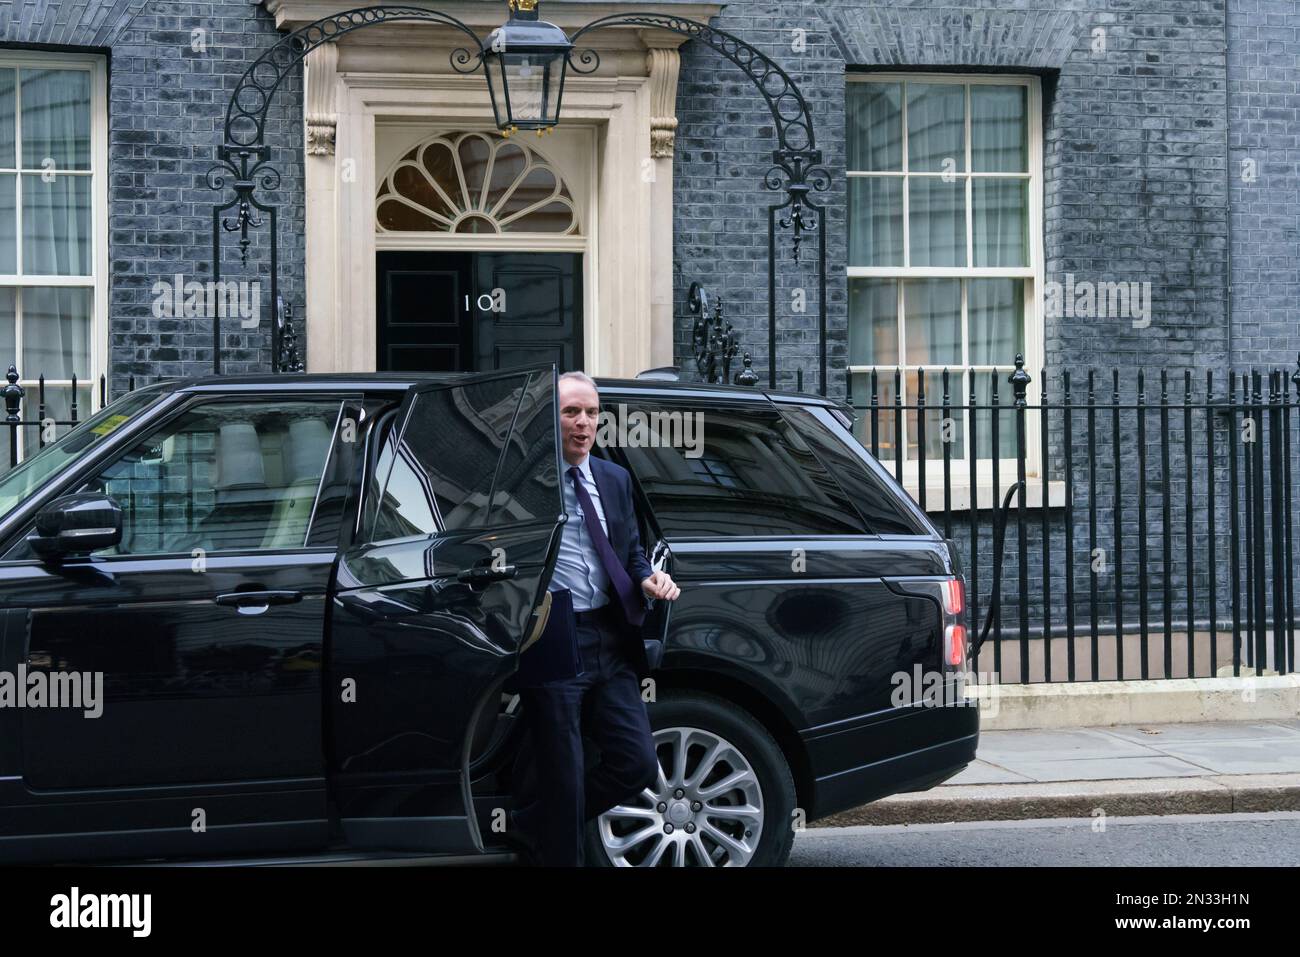 7th February 2023, Downing St, London, UK Following this mornings reshuffle, Cabinet Ministers arrive for a delayed cabinet meeting held in the afternoon.  PICTURED: Dominic Saab, Deputy Prime Minister Bridget Catterall AlamyLiveNews Stock Photo